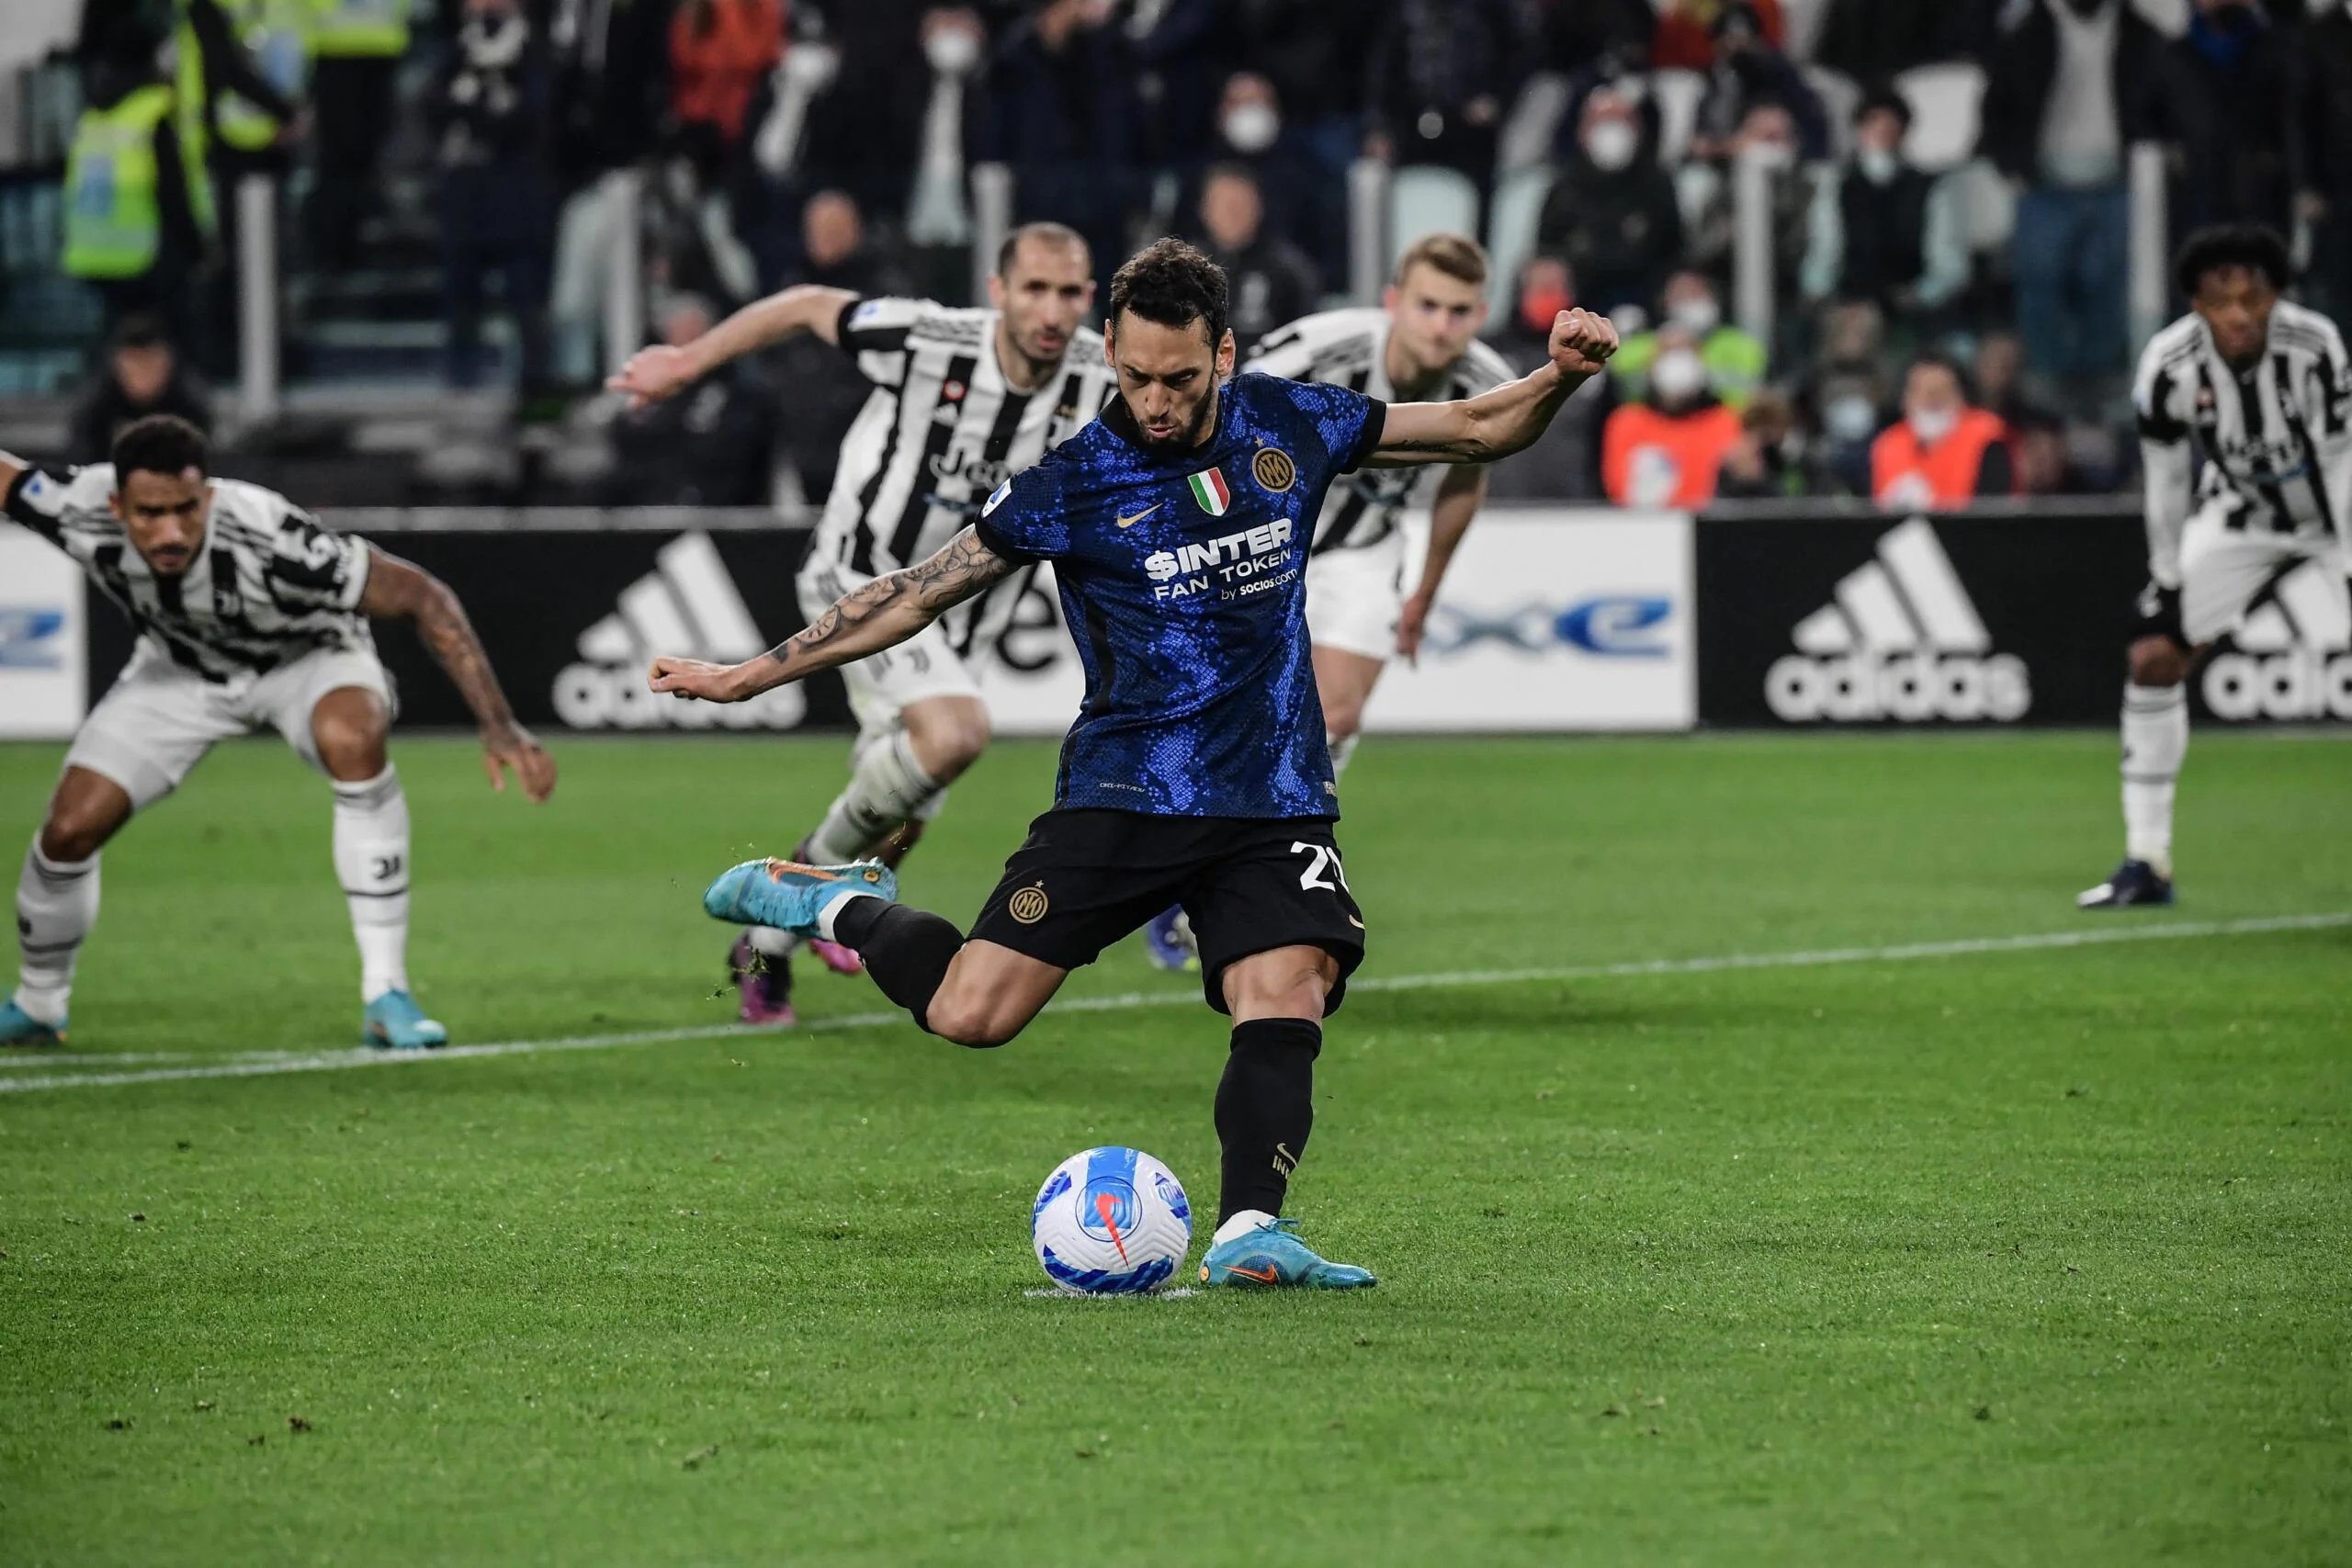 Juventus were fuming following the clash with Inter, but the coordinator Gianluca Rocchi does not believe referee Massimiliano Irrati made any mistake.